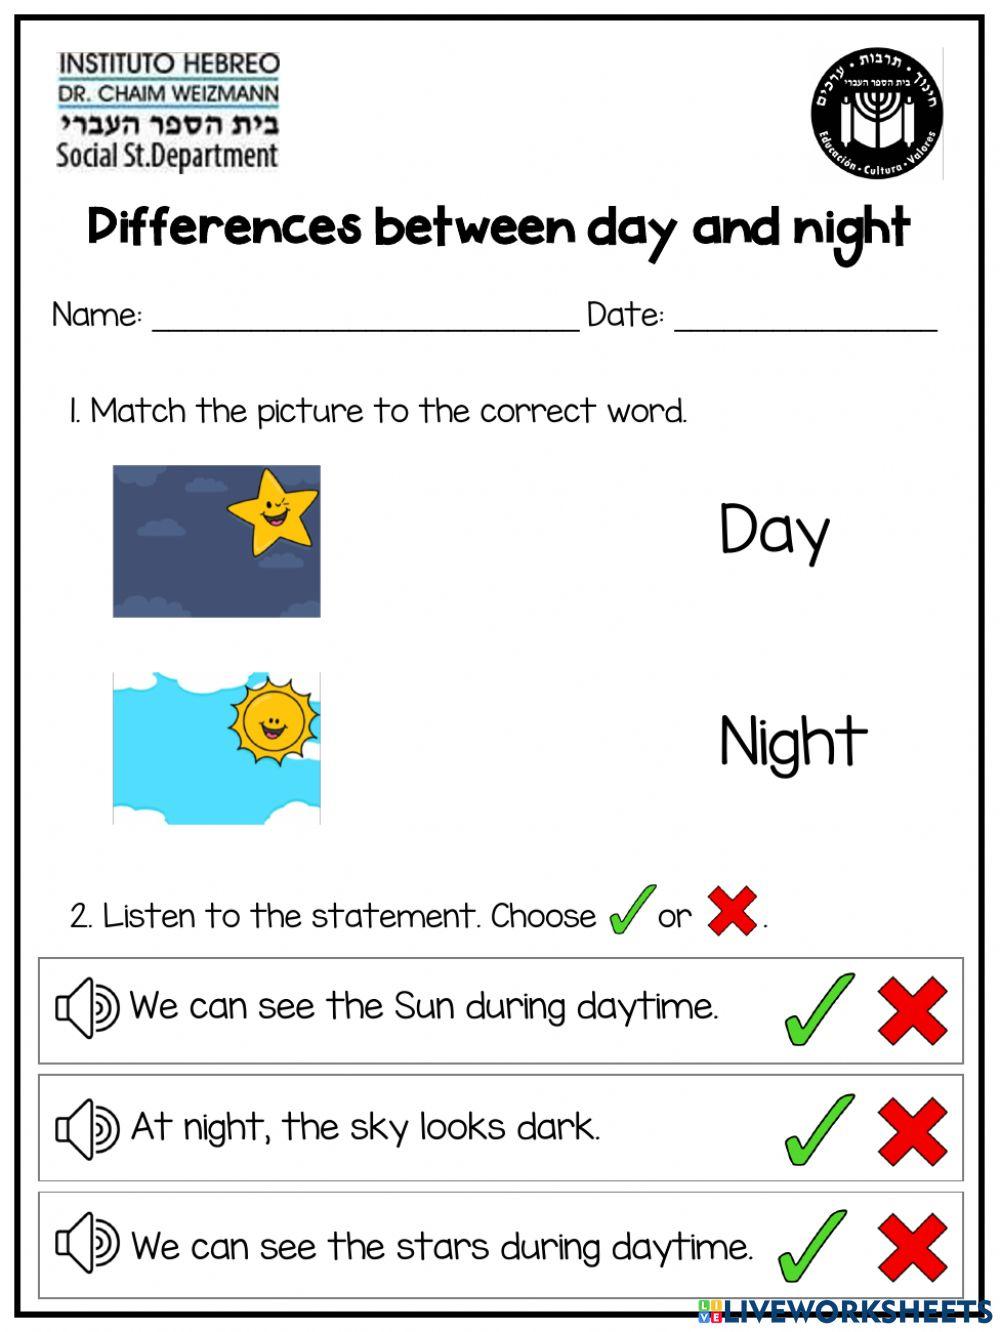 Differences between day and night